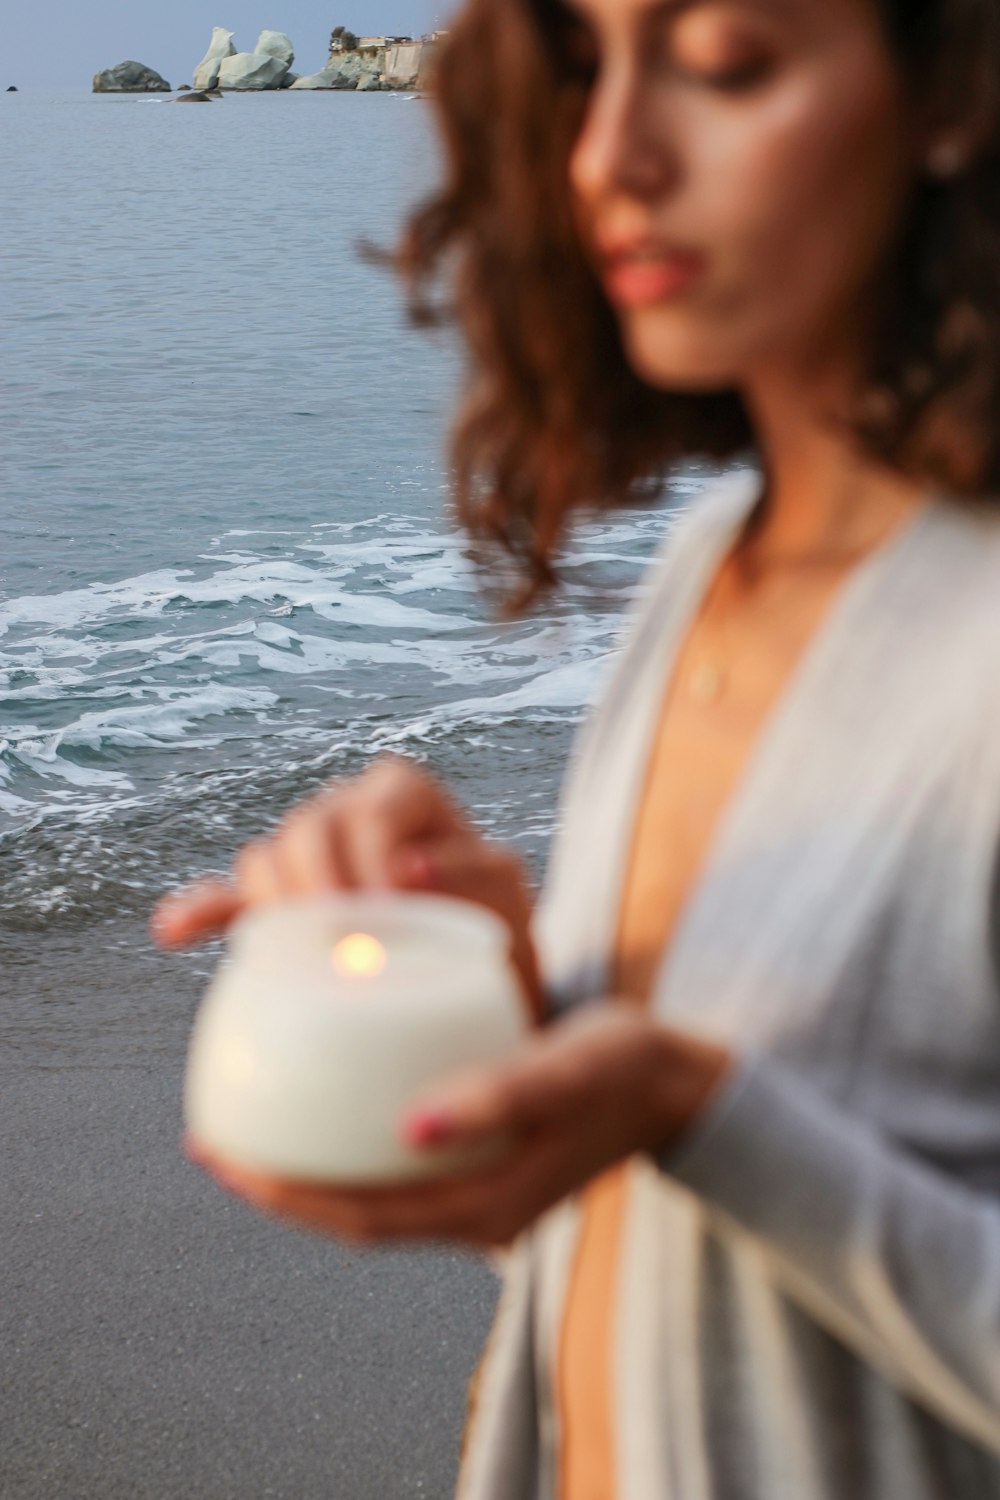 a woman standing on a beach holding a coconut